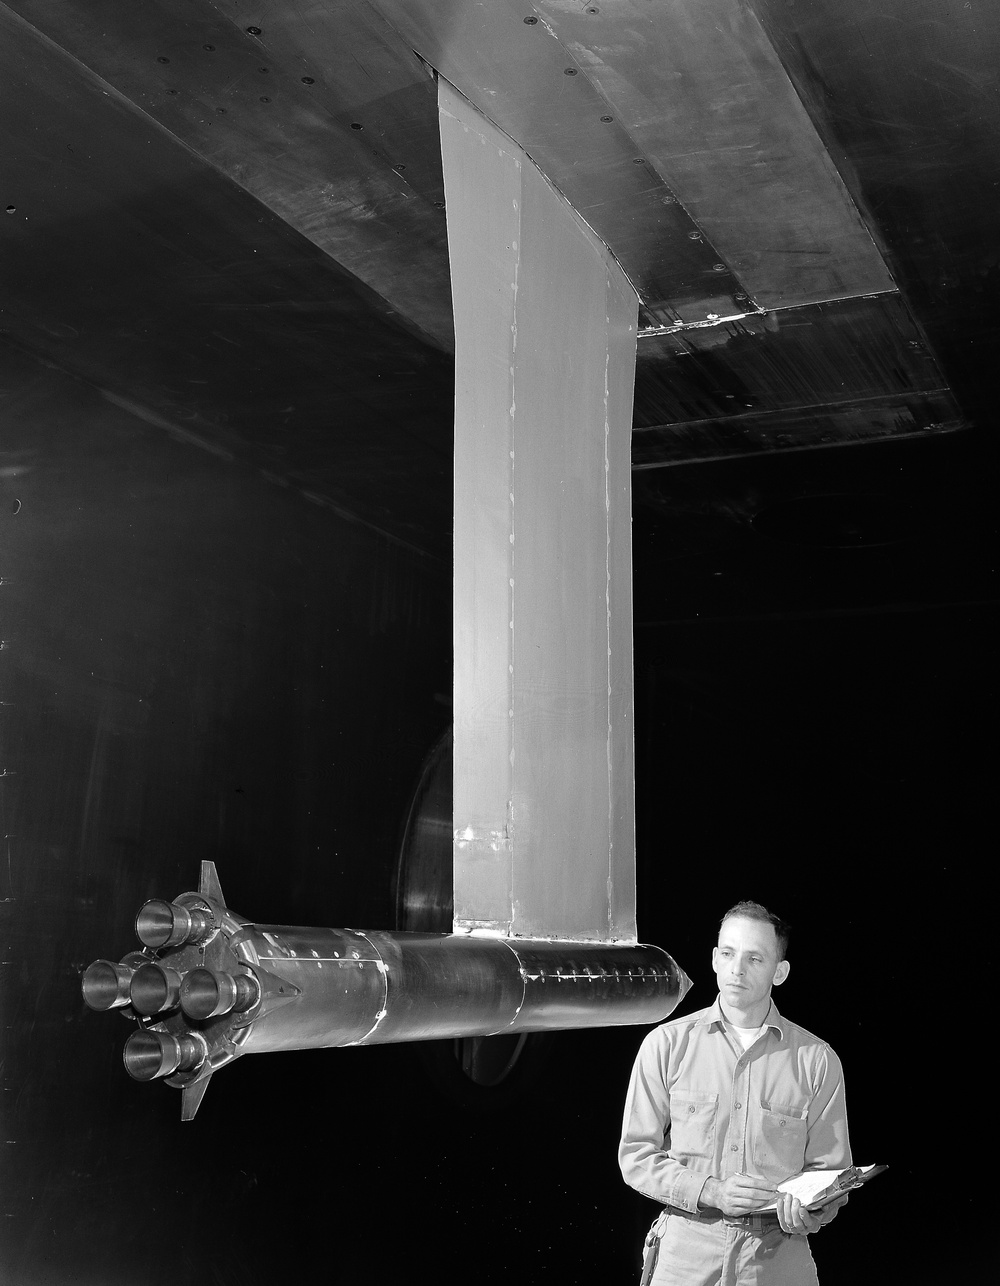 SATURN IC ENGINE GIMBAL MODEL IN THE 10X10 FOOT WIND TUNNEL